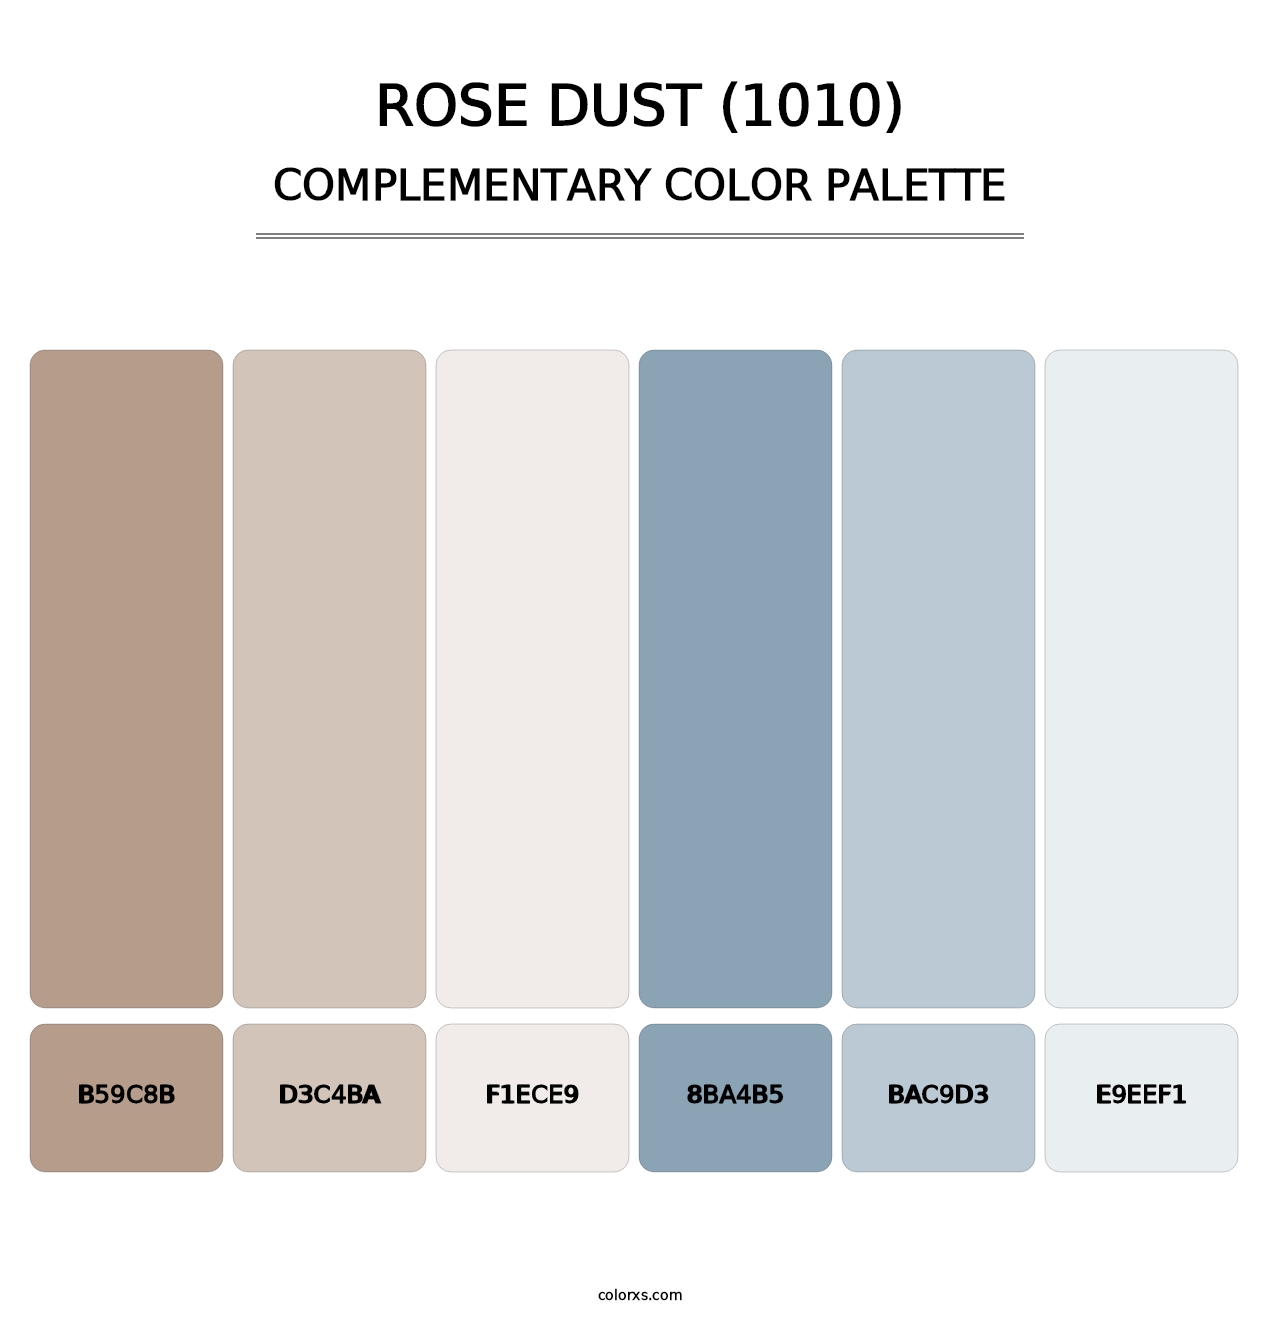 Rose Dust (1010) - Complementary Color Palette